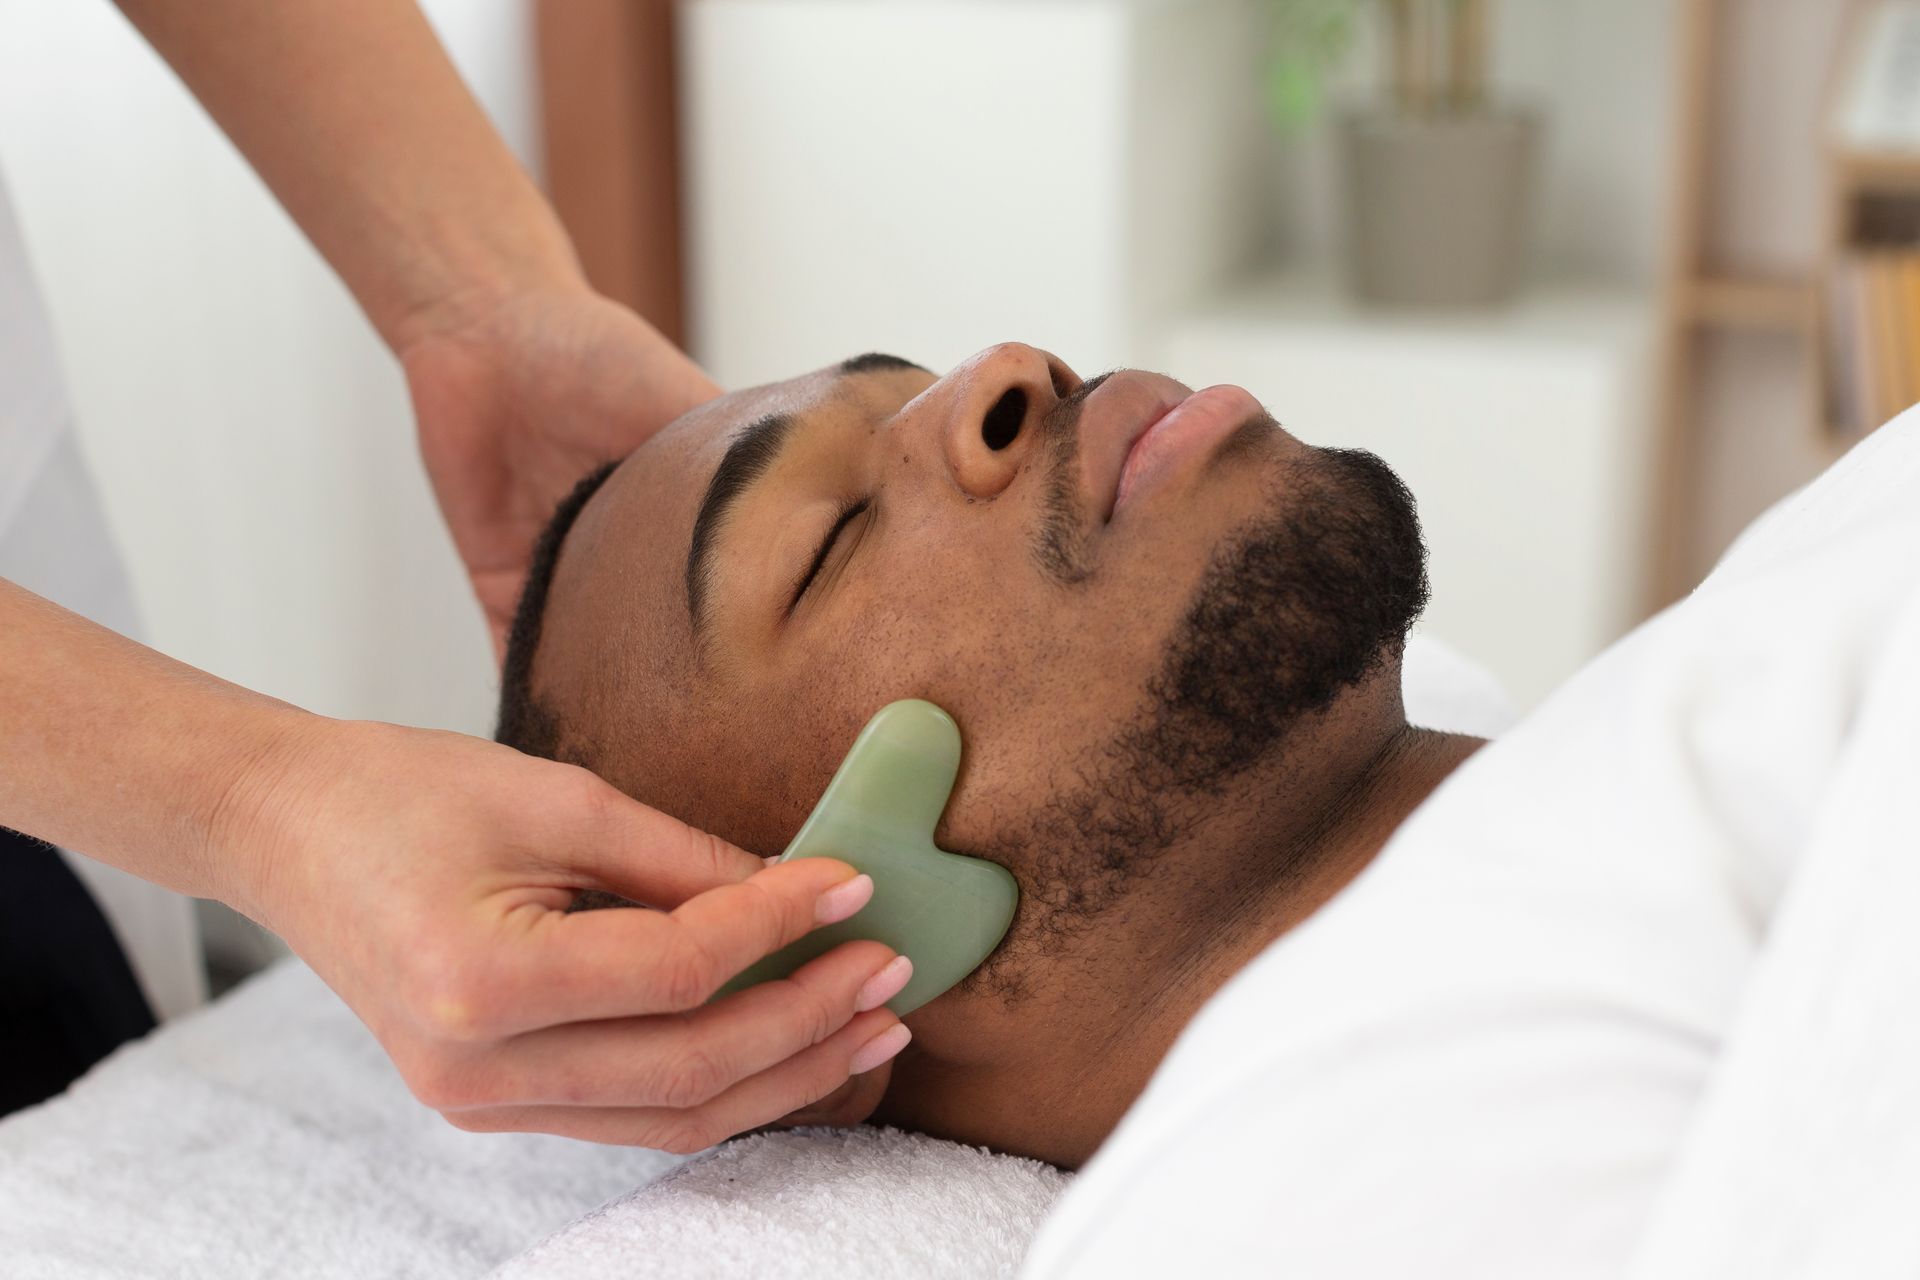 A man is getting a gua sha massage on his face at a spa.